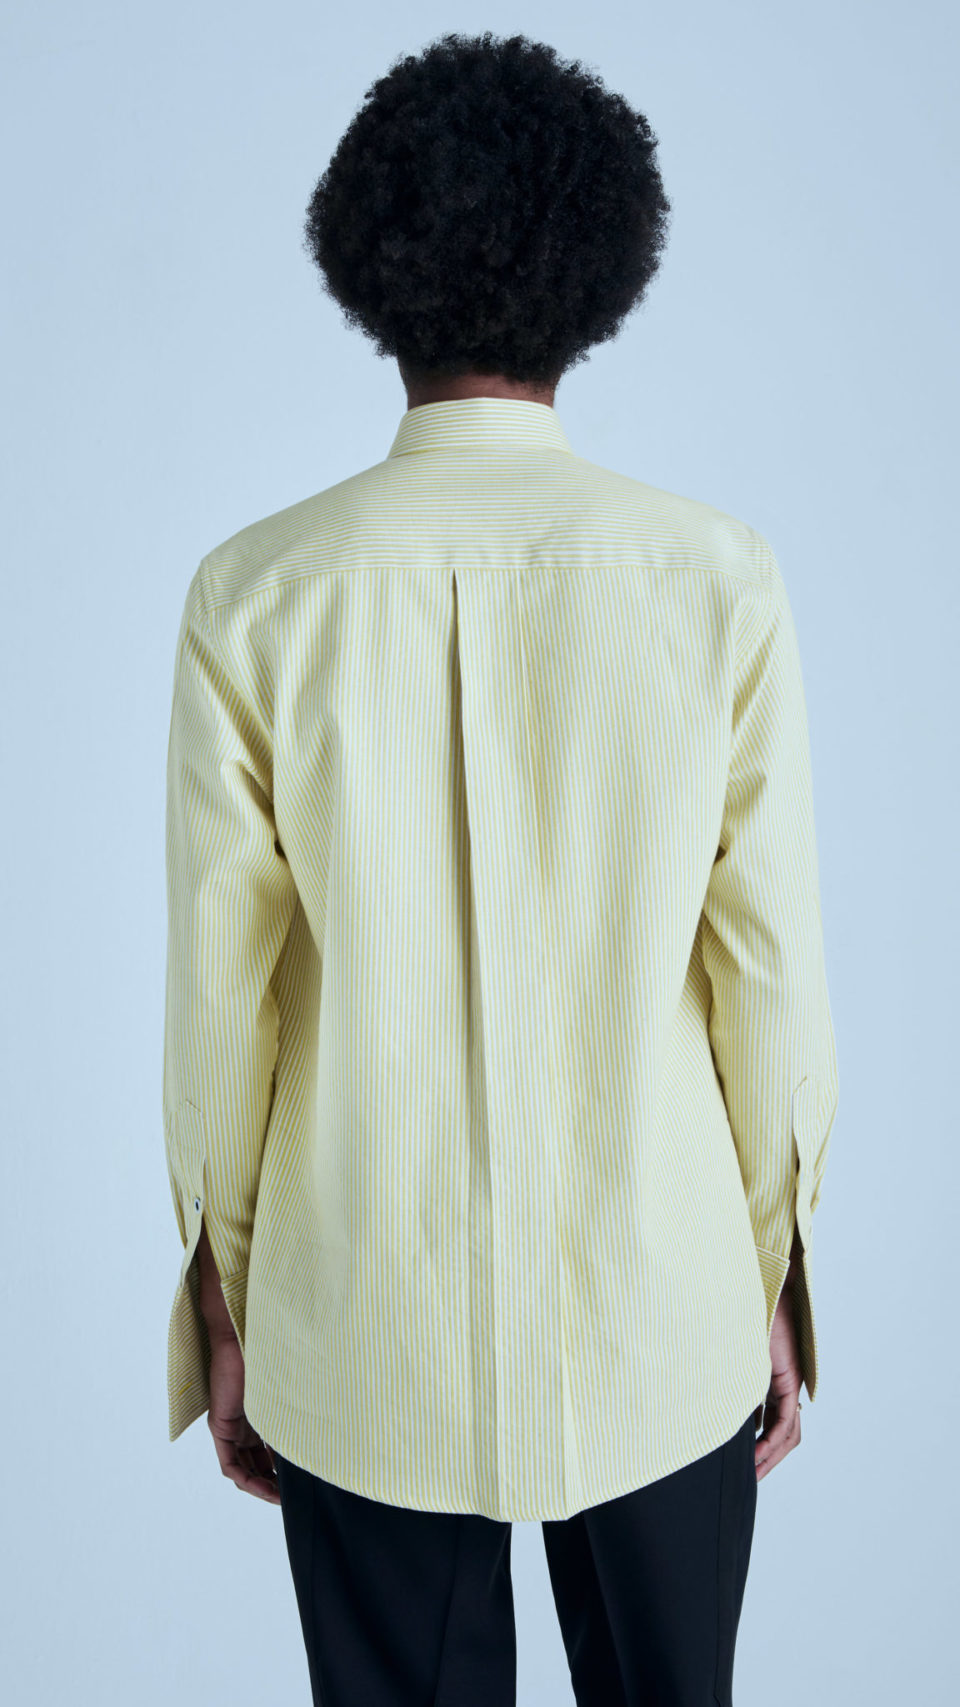 Happy tailored shirt in yellow - Sustainanble clothing brand MAR by Maria Karimi